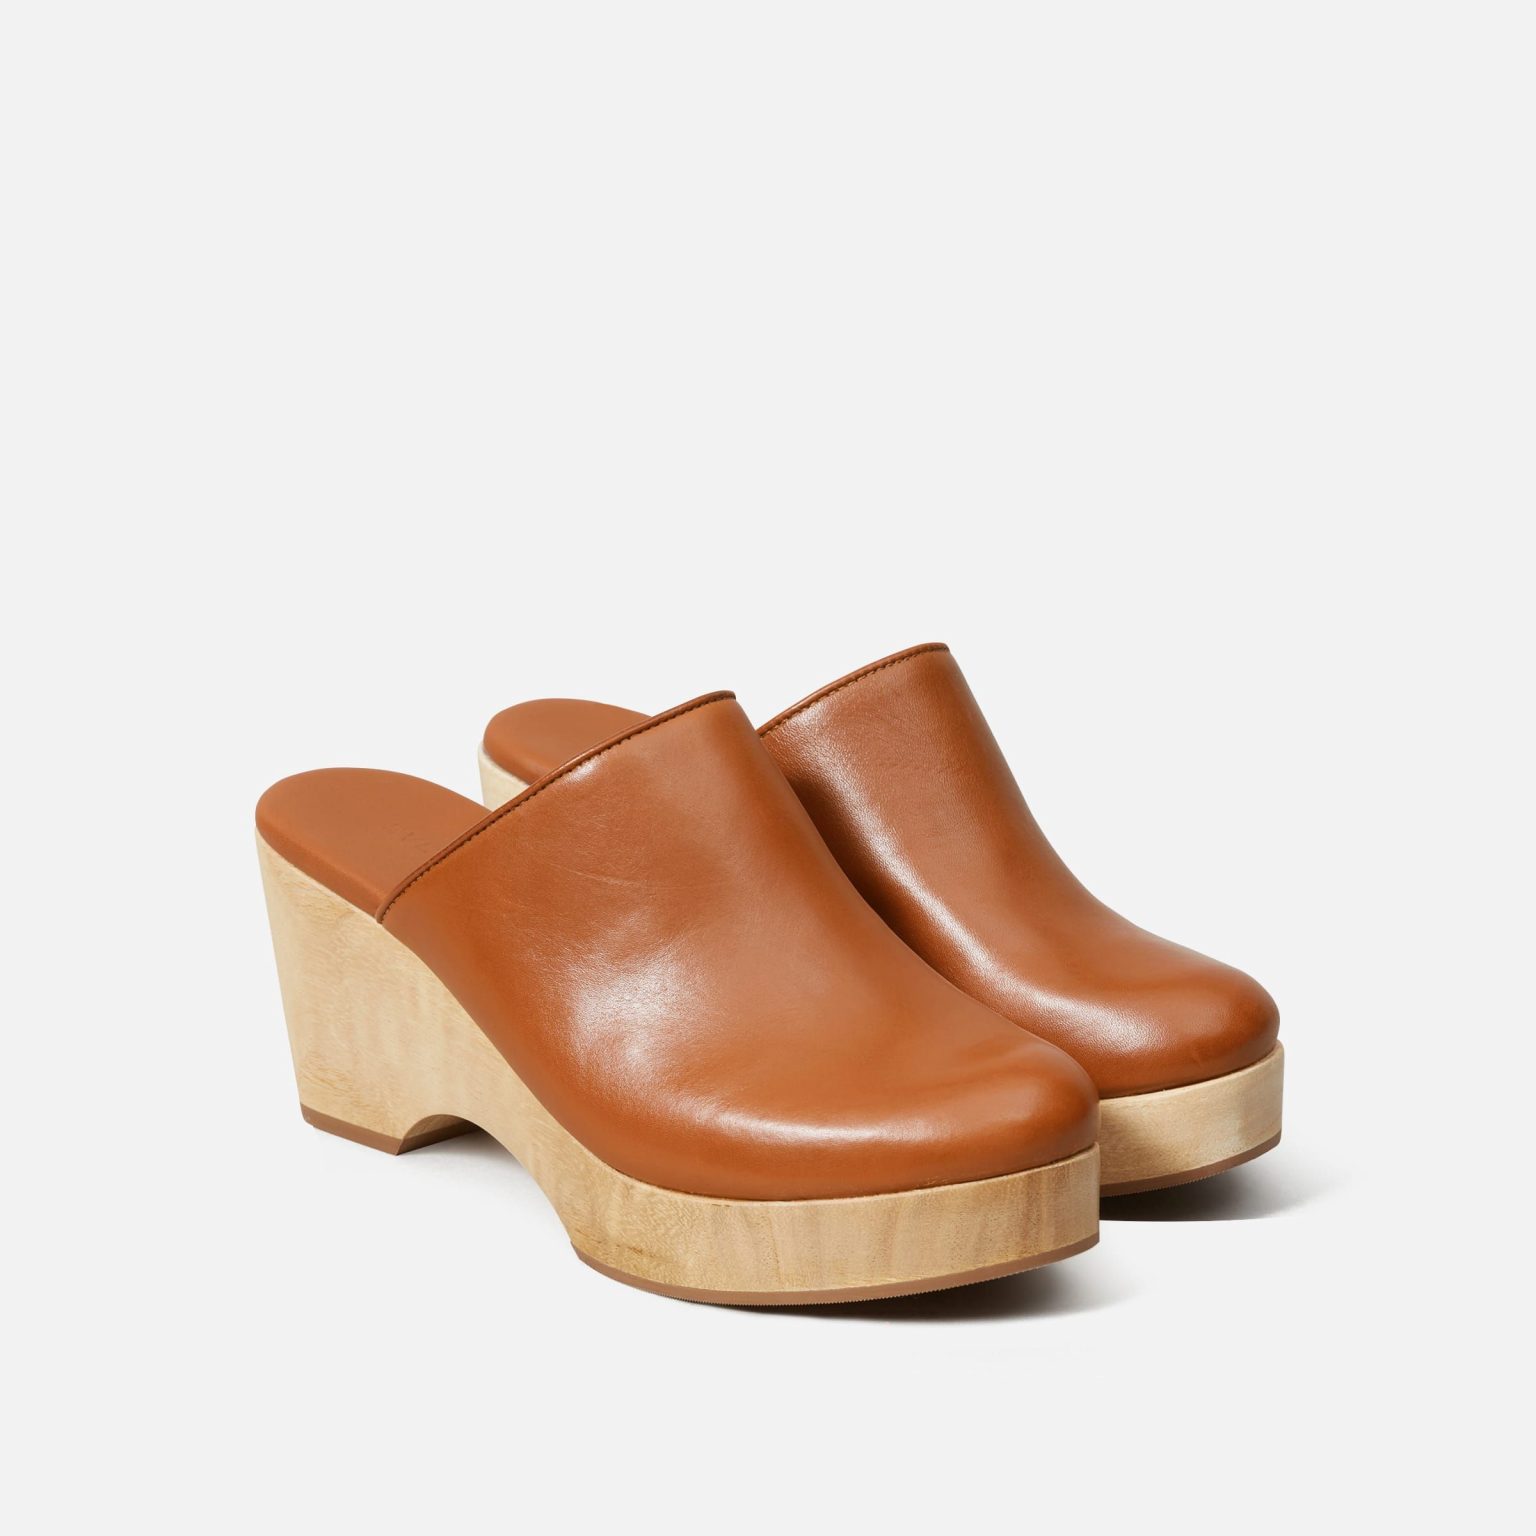 Wooden Clogs Are The New Trend!